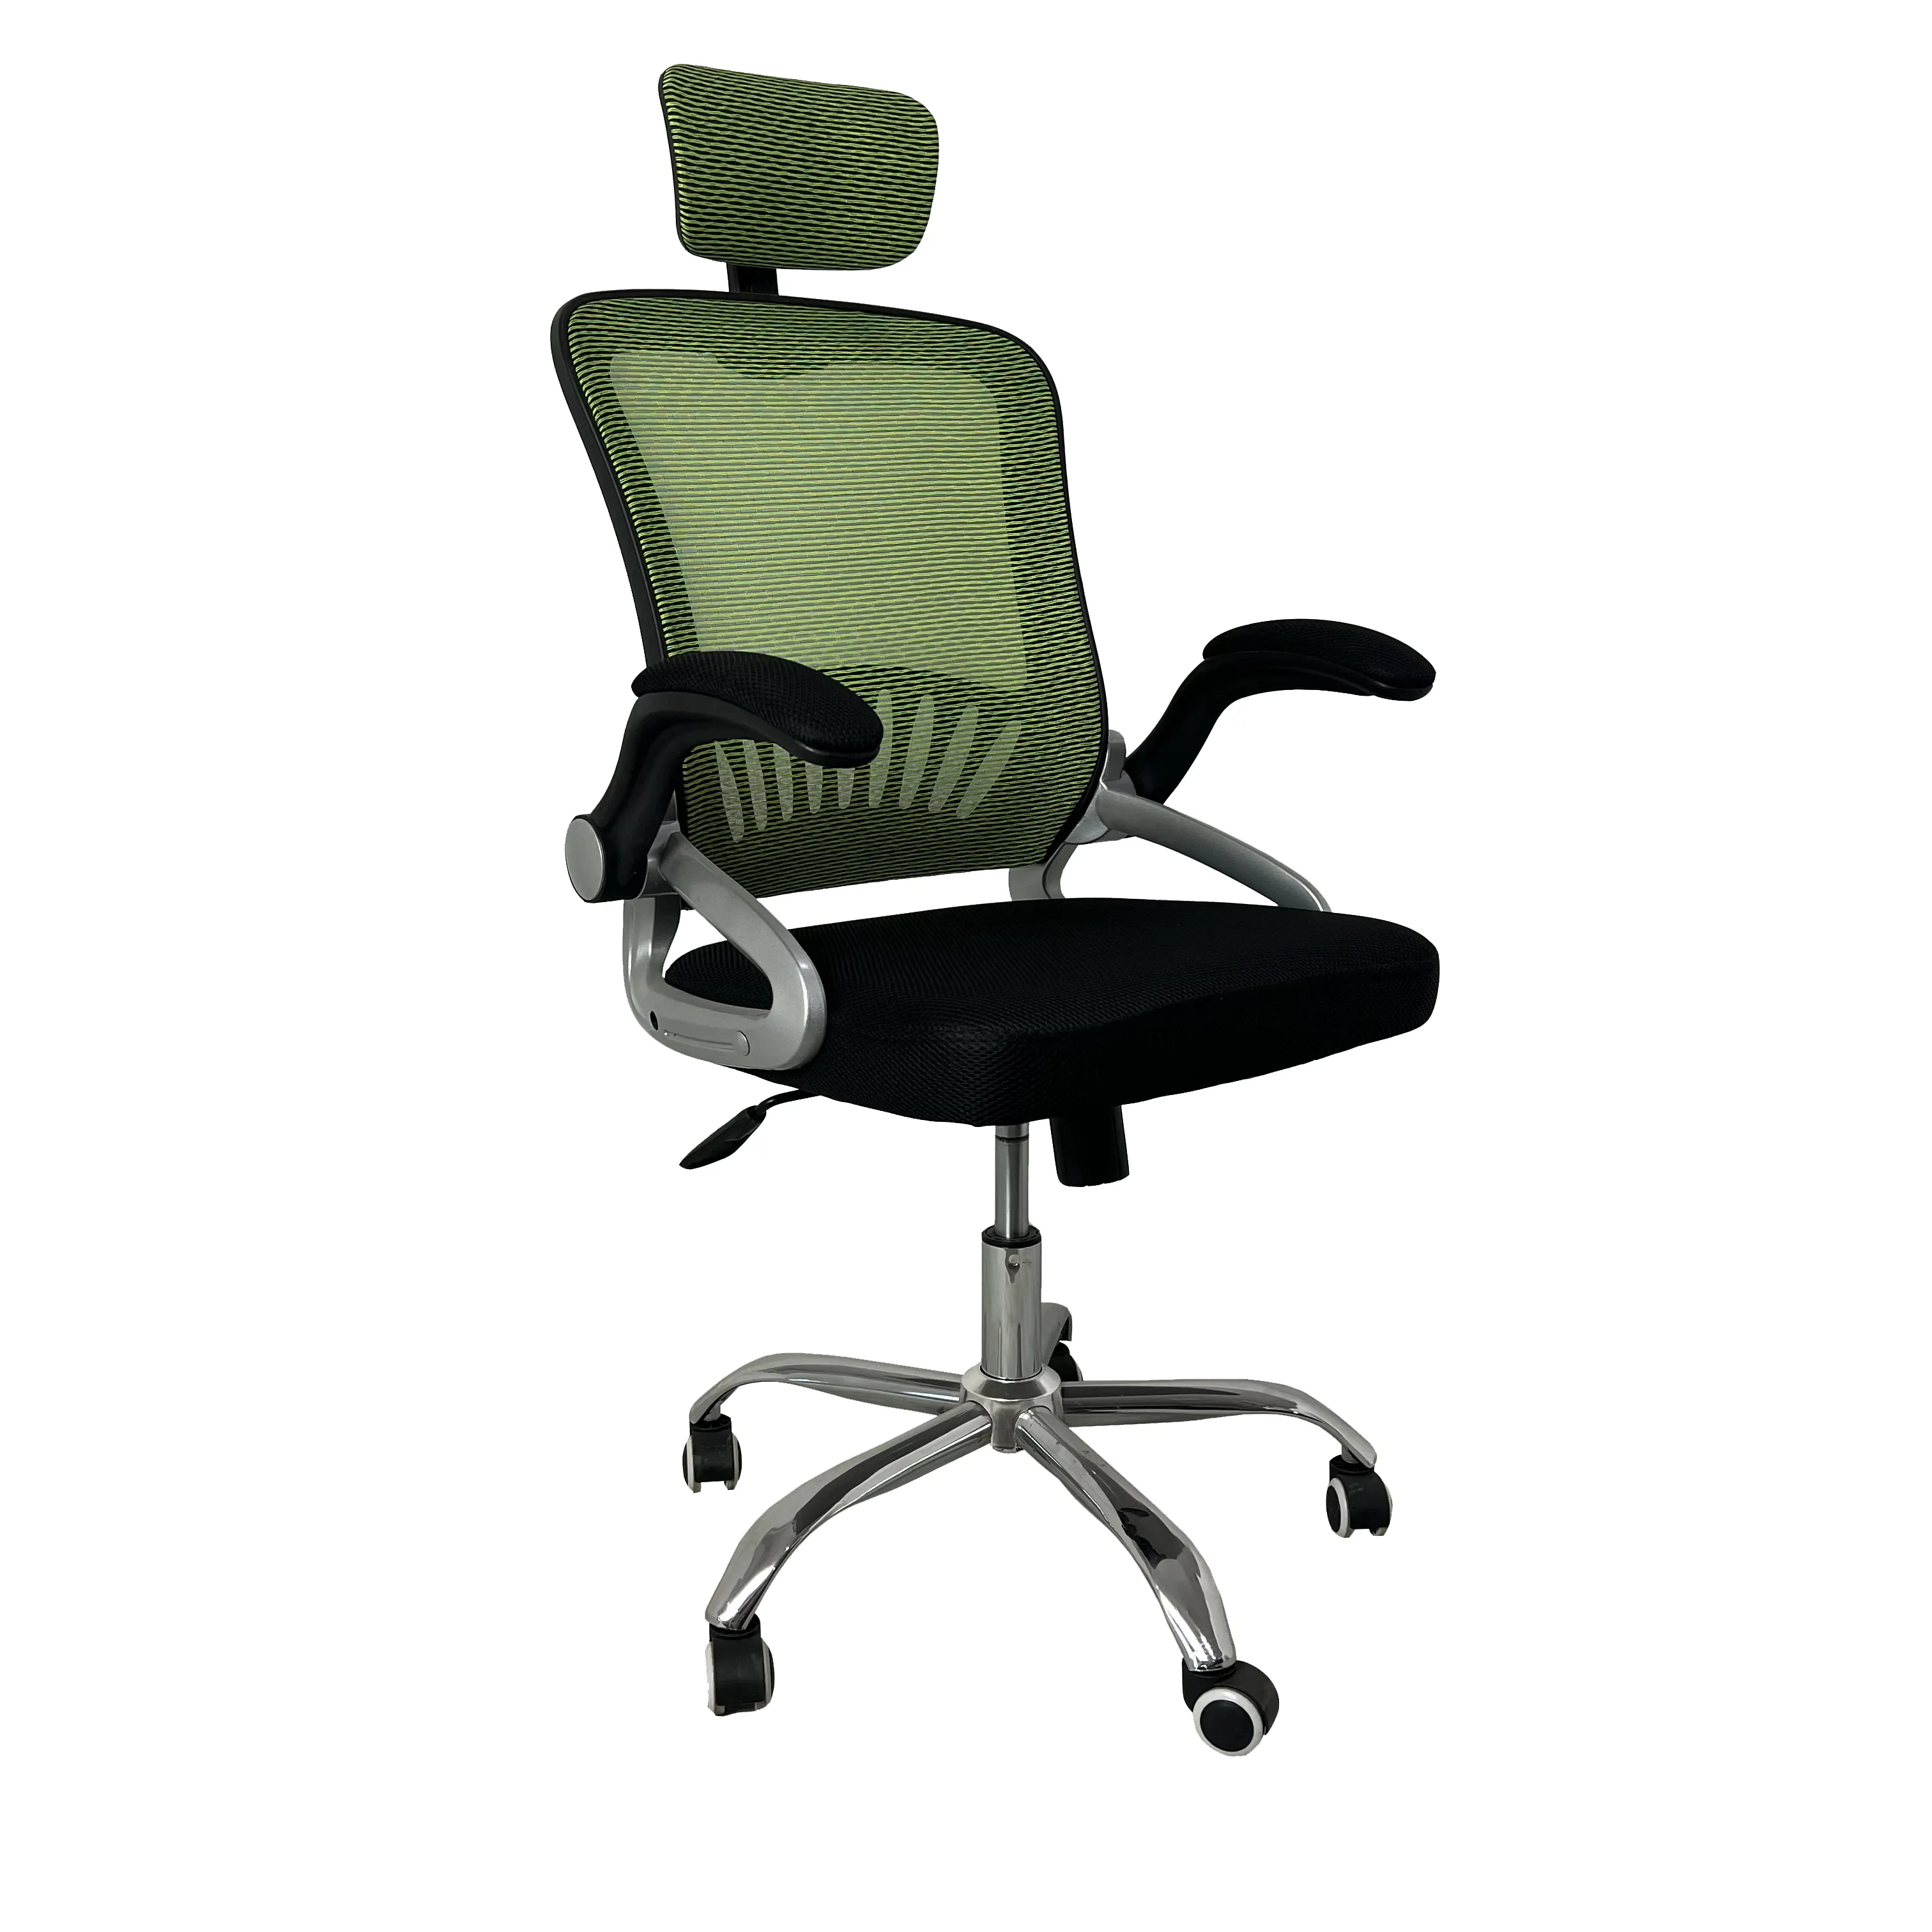 New Design Mesh Chair Eco-friendly Height-adjustable Office Chair Swivel Adjustable office Furniture Office Mesh Chair